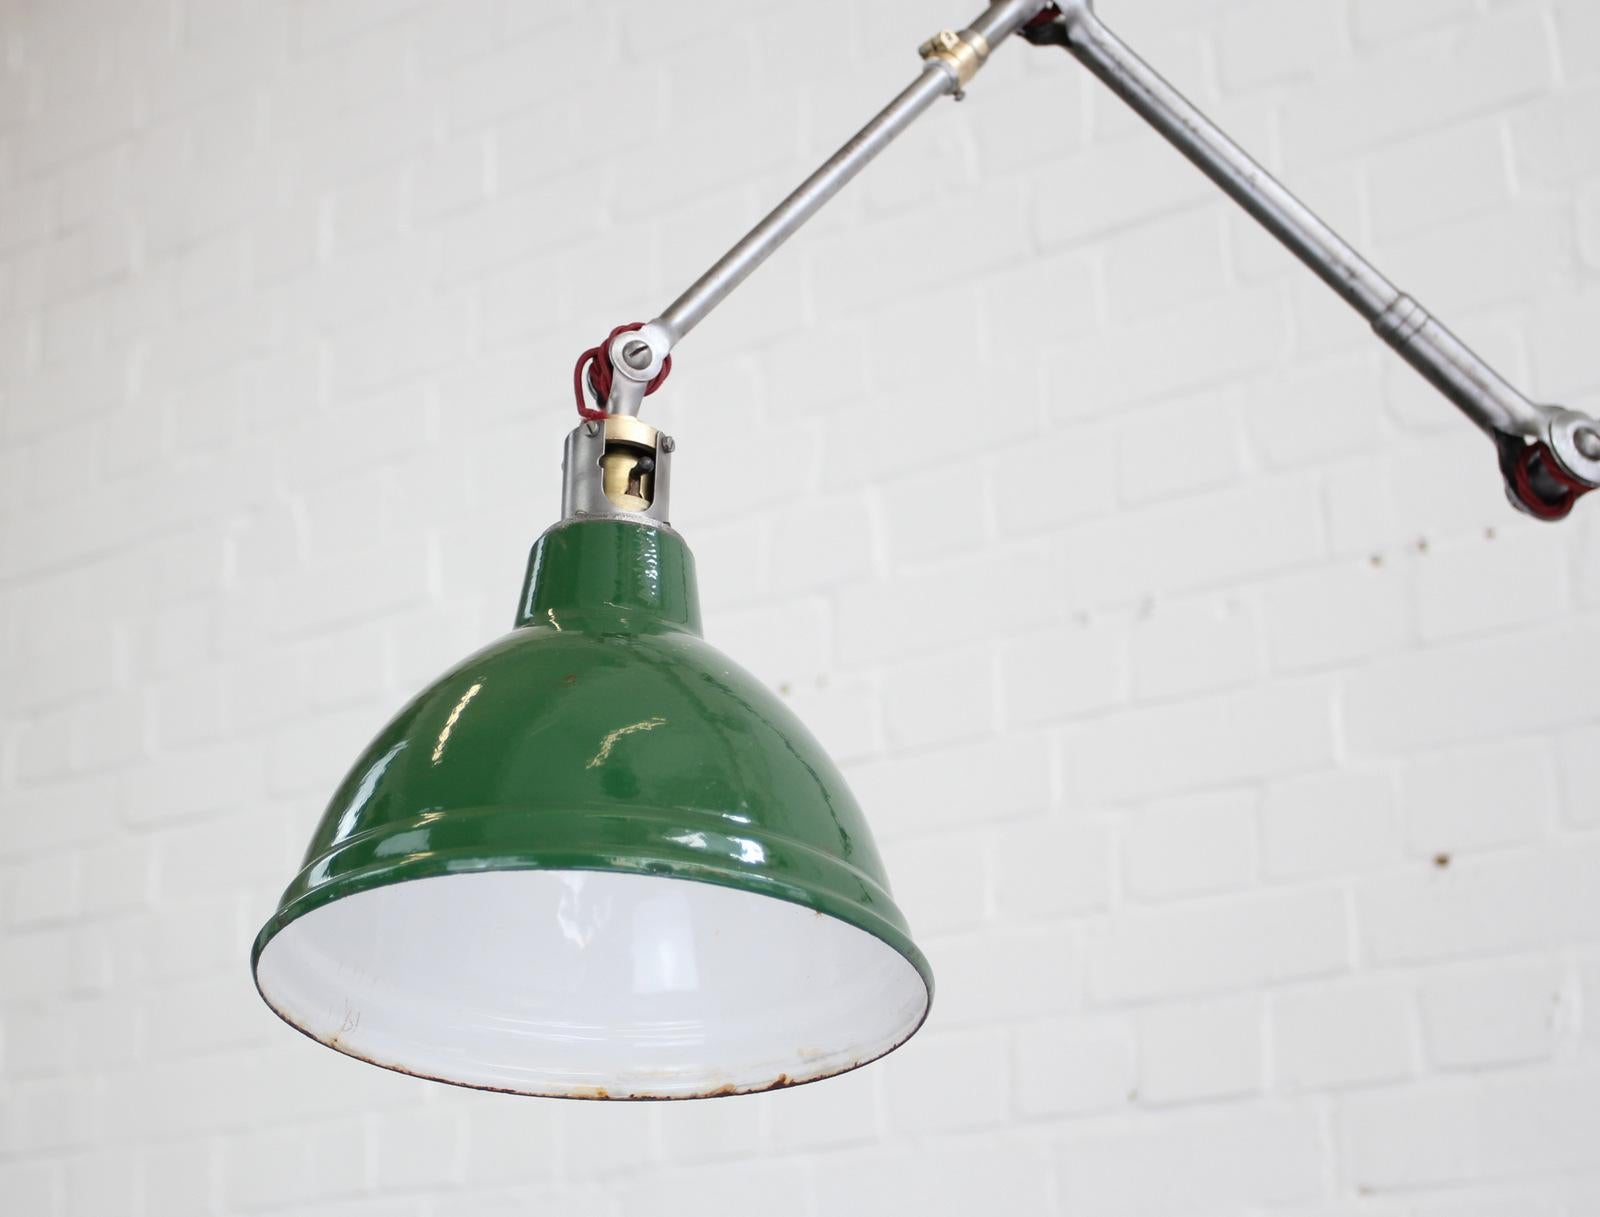 Large industrial task lamp by Dugdills, circa 1930s.

- Vitreous green enamel shade
- Tubular steel articulated arms
- Wires directly into a wall or ceiling feed
- Debossed branding on the base
- Takes B22 fitting bulbs
- Inline switch on the